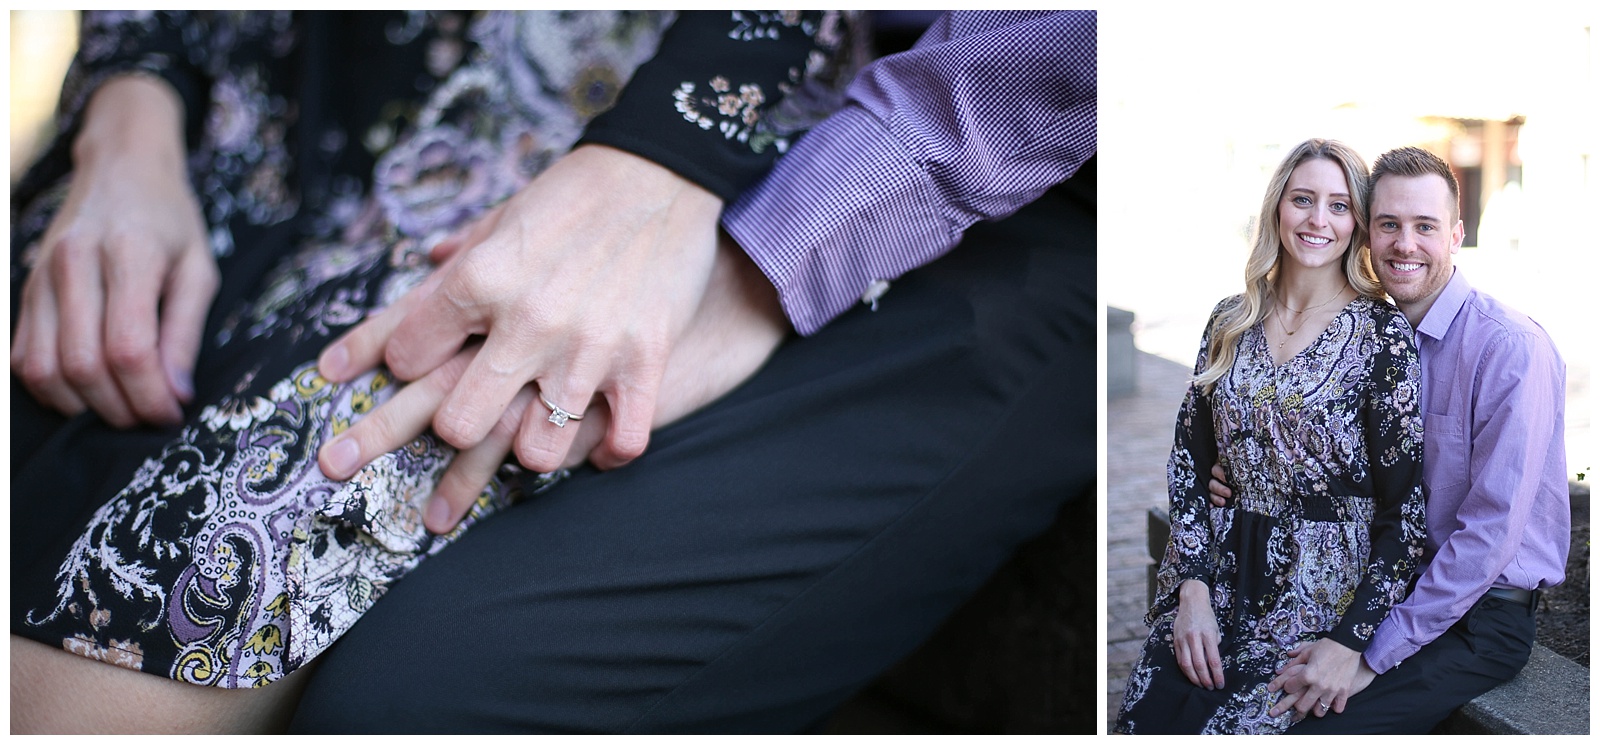 Dayton, Ohio Engagement Session | Monica Brown Photography | monicabrownphoto.com